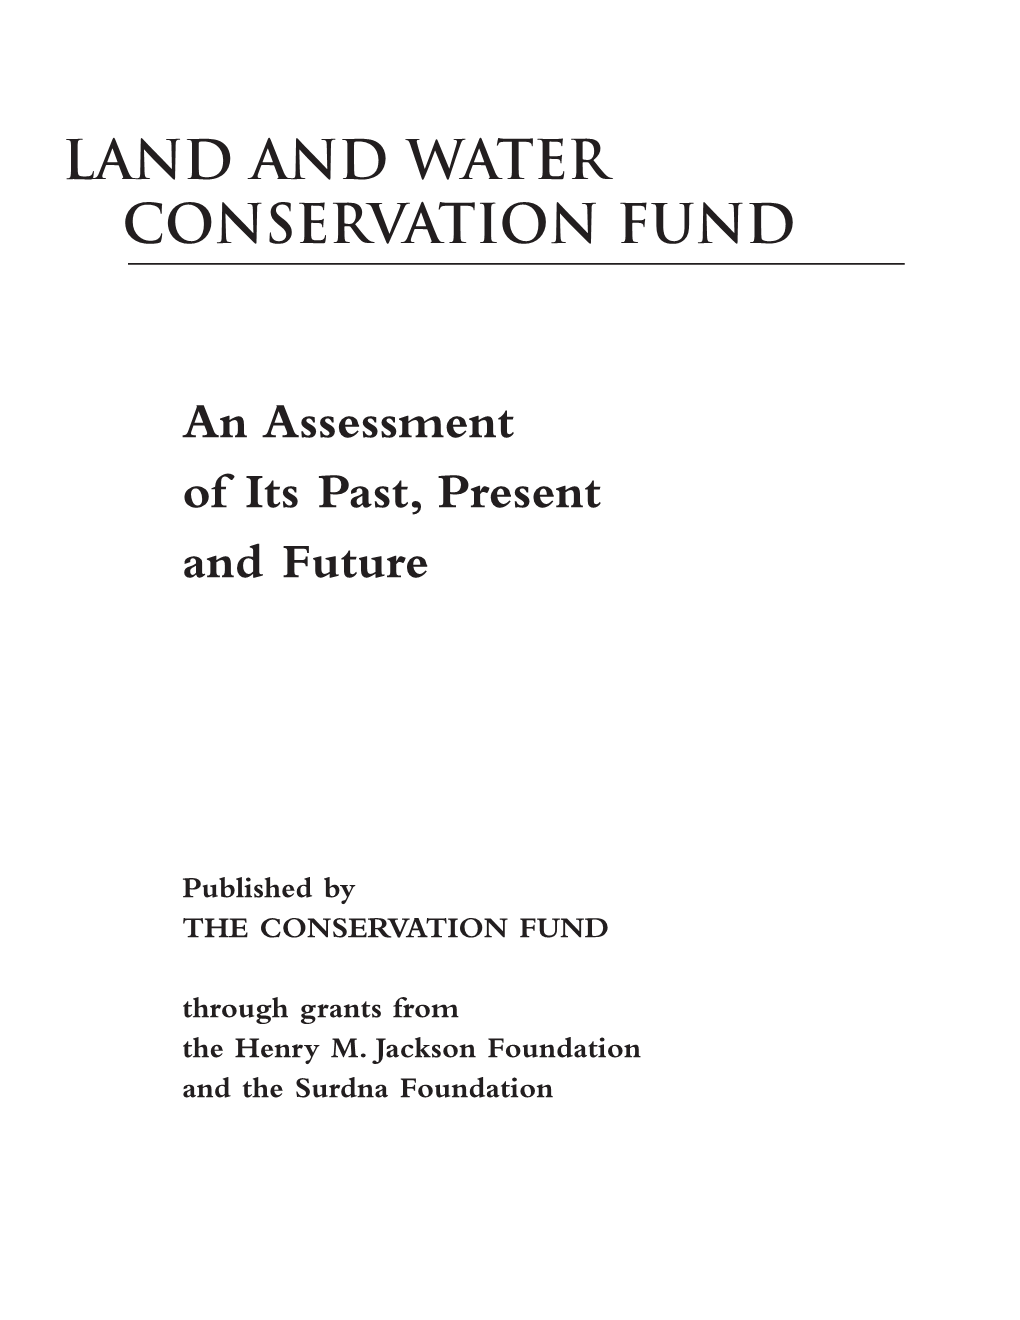 Land and Water Conservation Fund